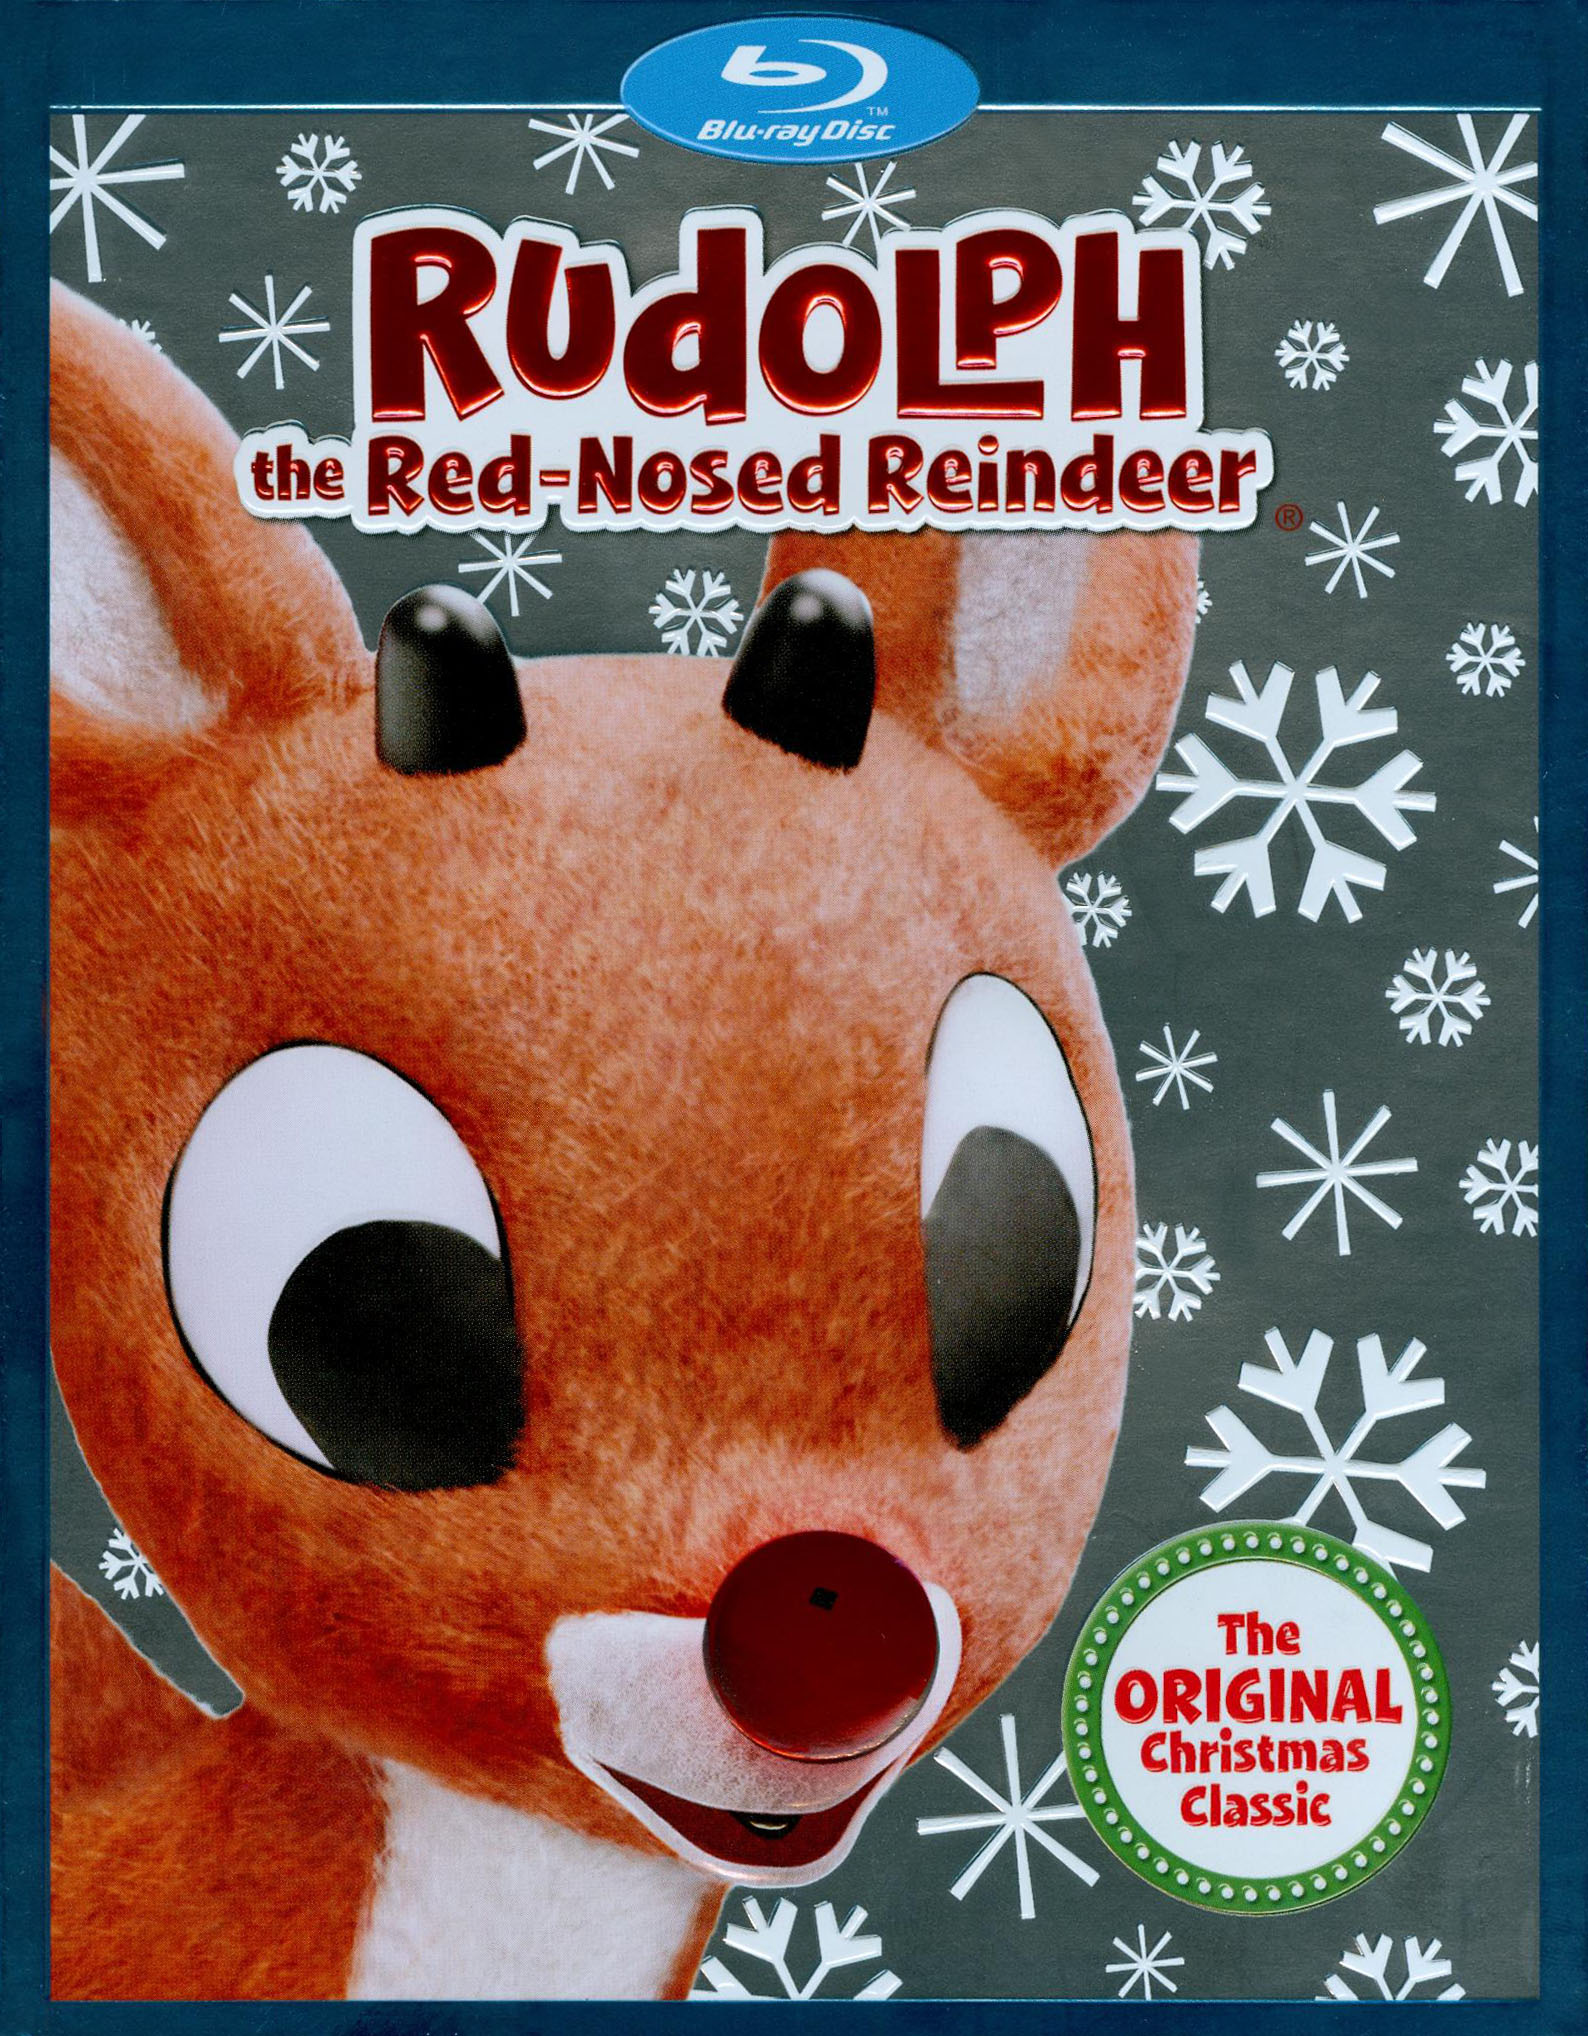 1964 rudolph the red nosed reindeer poster